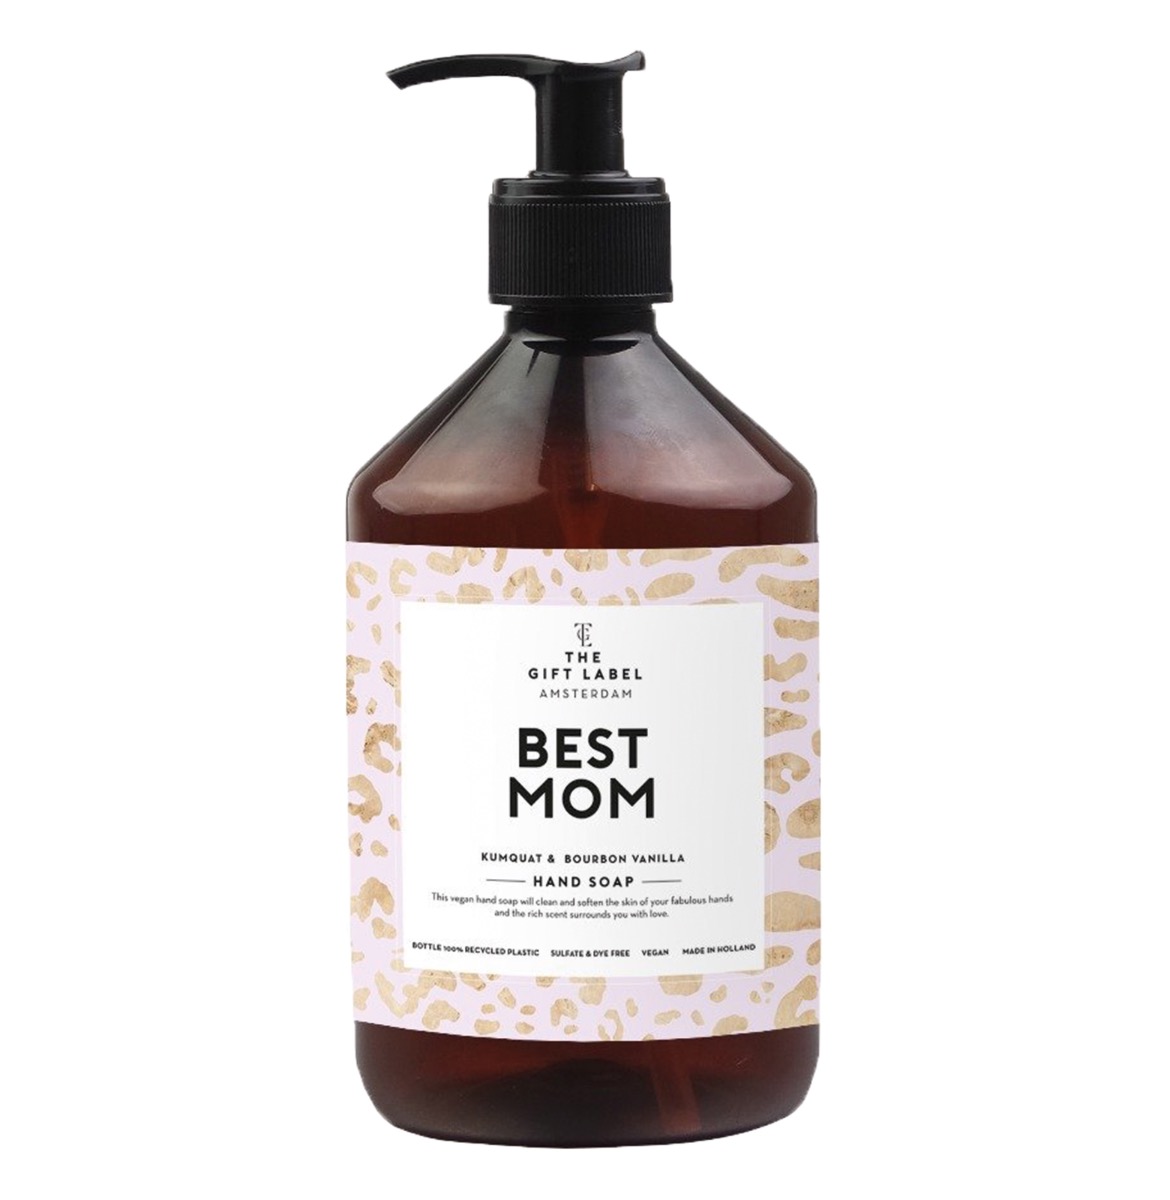 Best Mom - Hand Soap